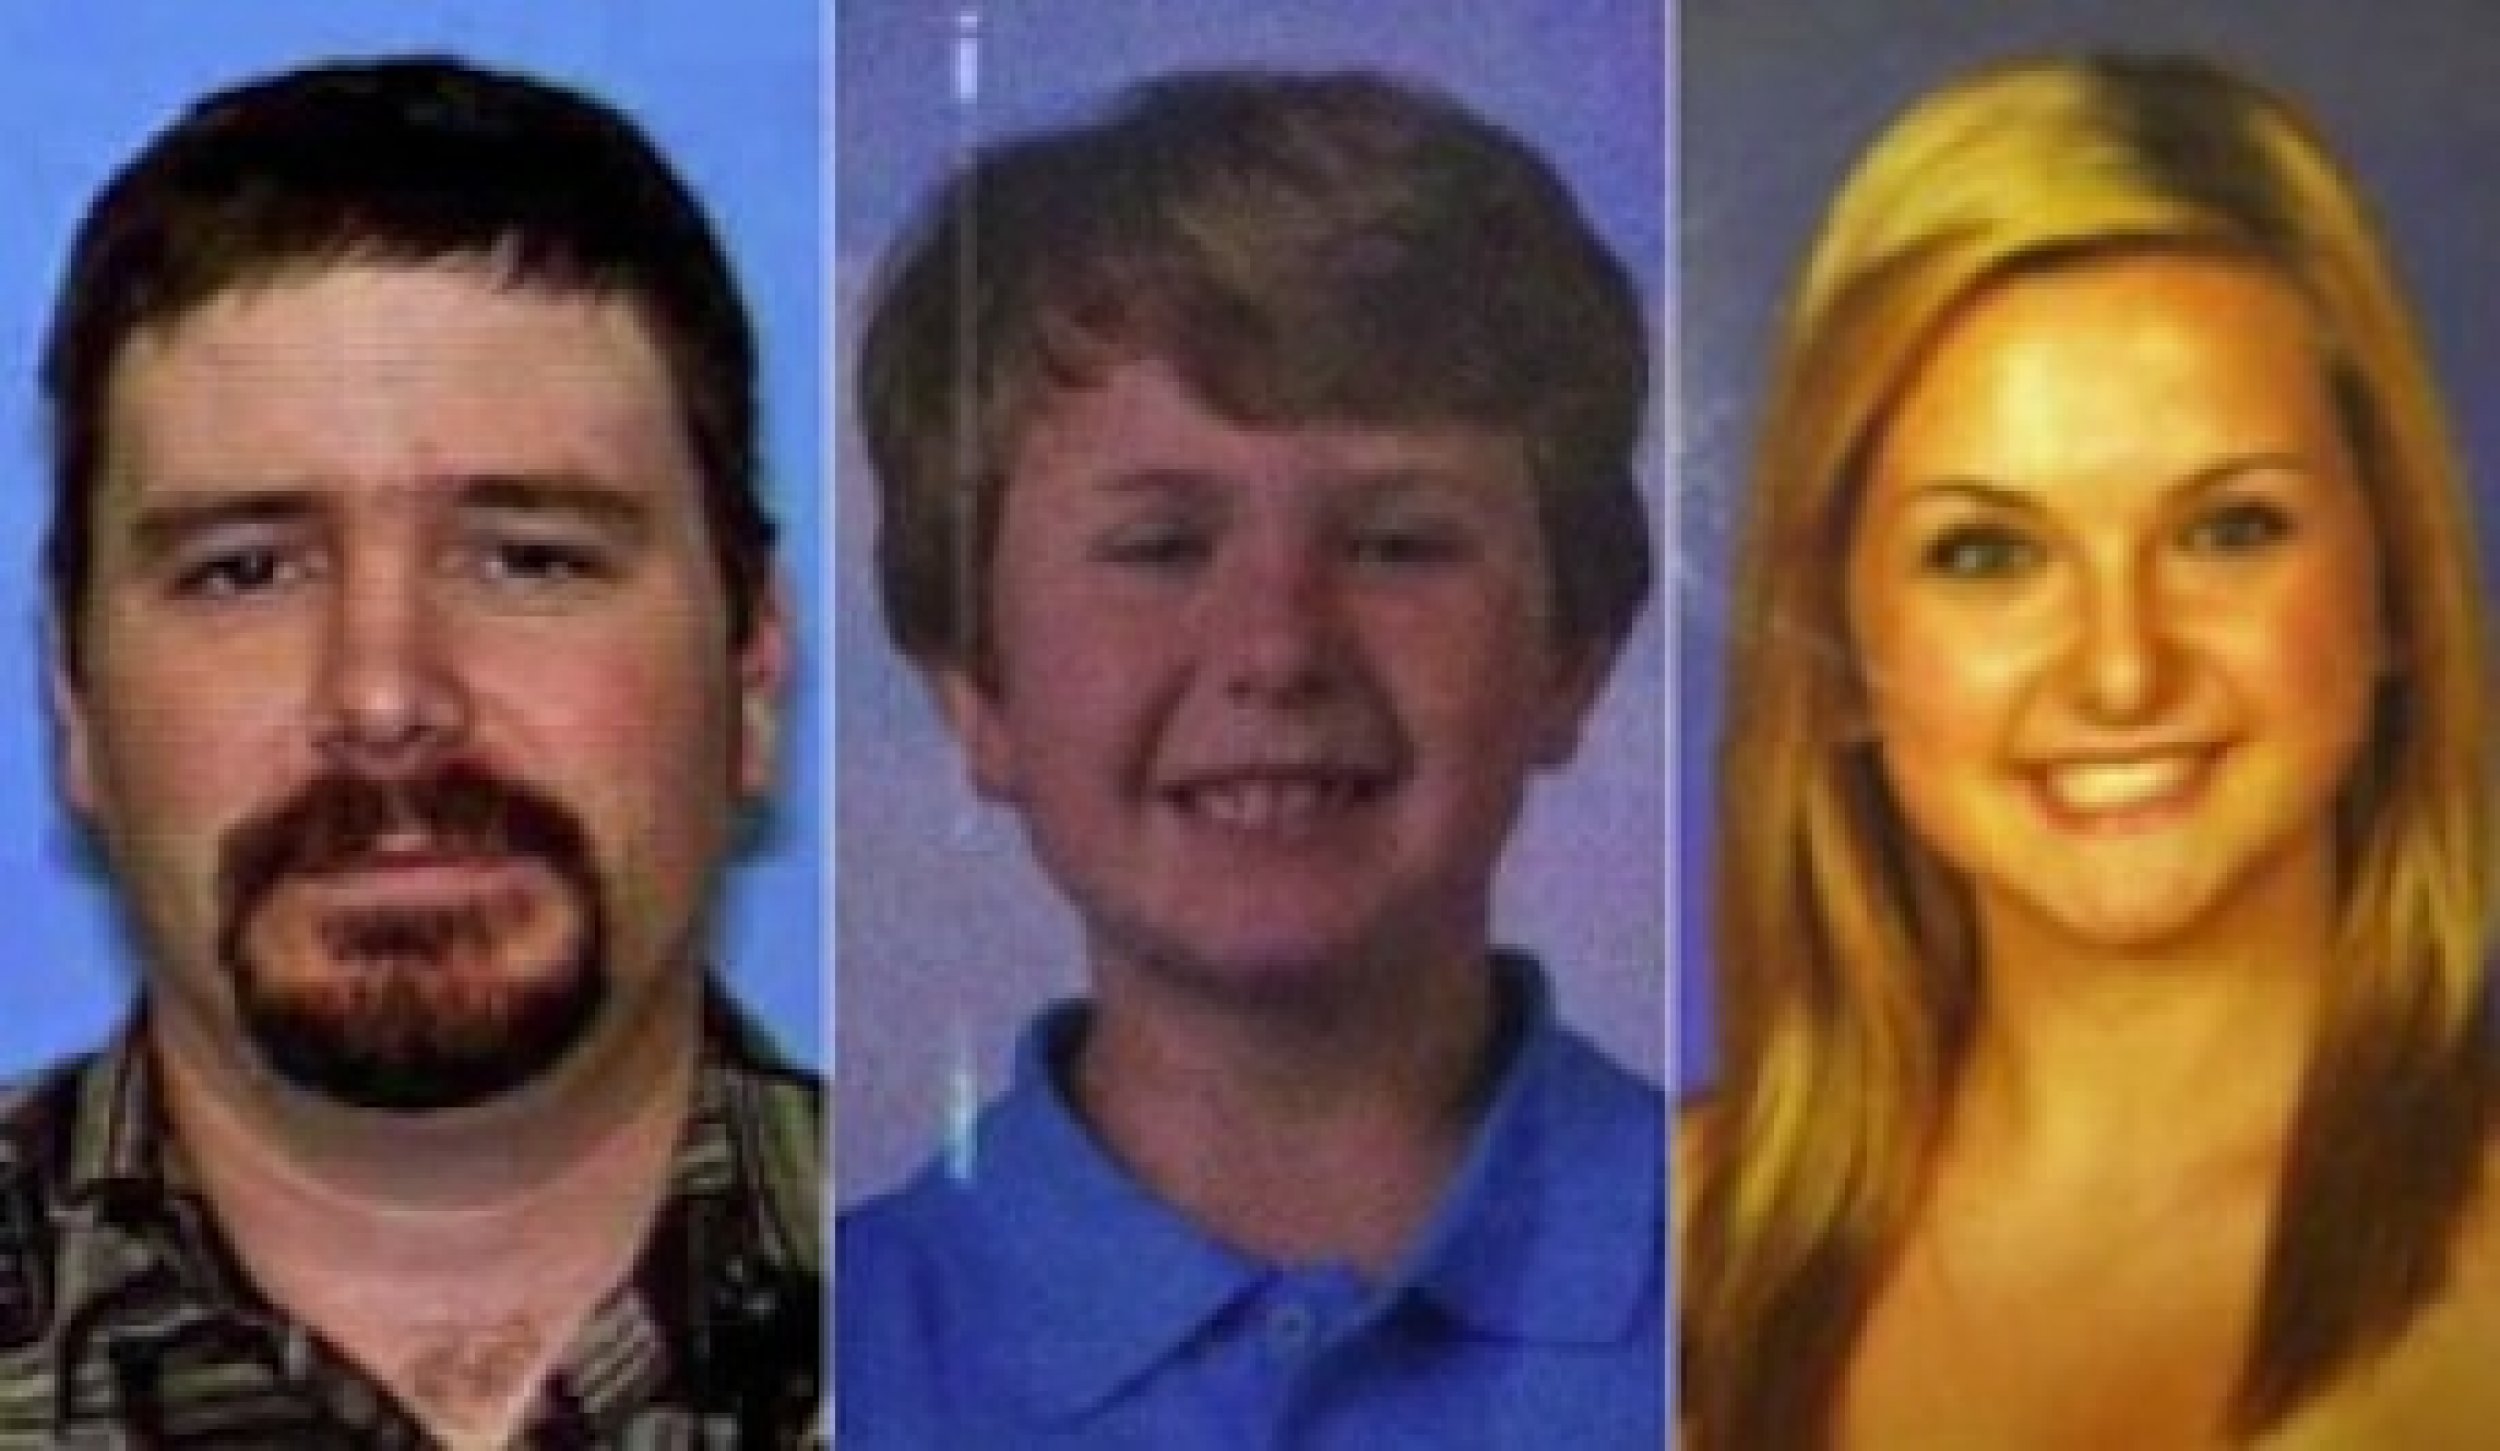 Amber Alert On Phone Angers California Residents, Search For Abducted  Hannah And Ethan Anderson And Kidnapper James Lee DiMaggio Continues